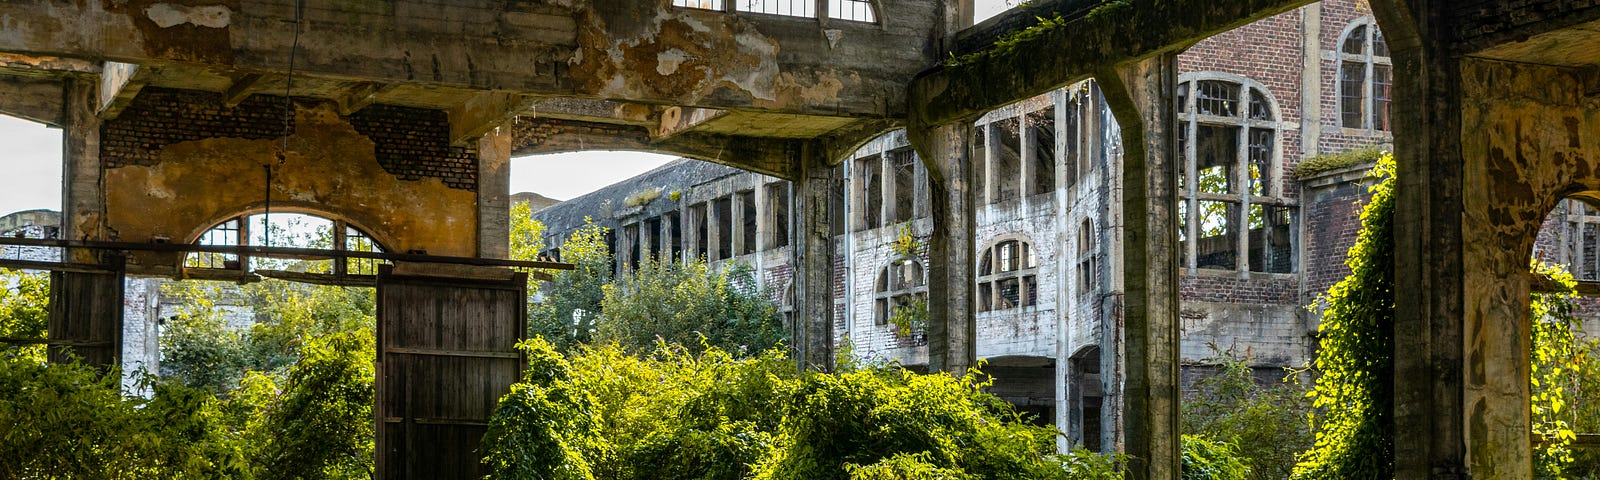 A crumbling abandoned building being reclaimed by nature.